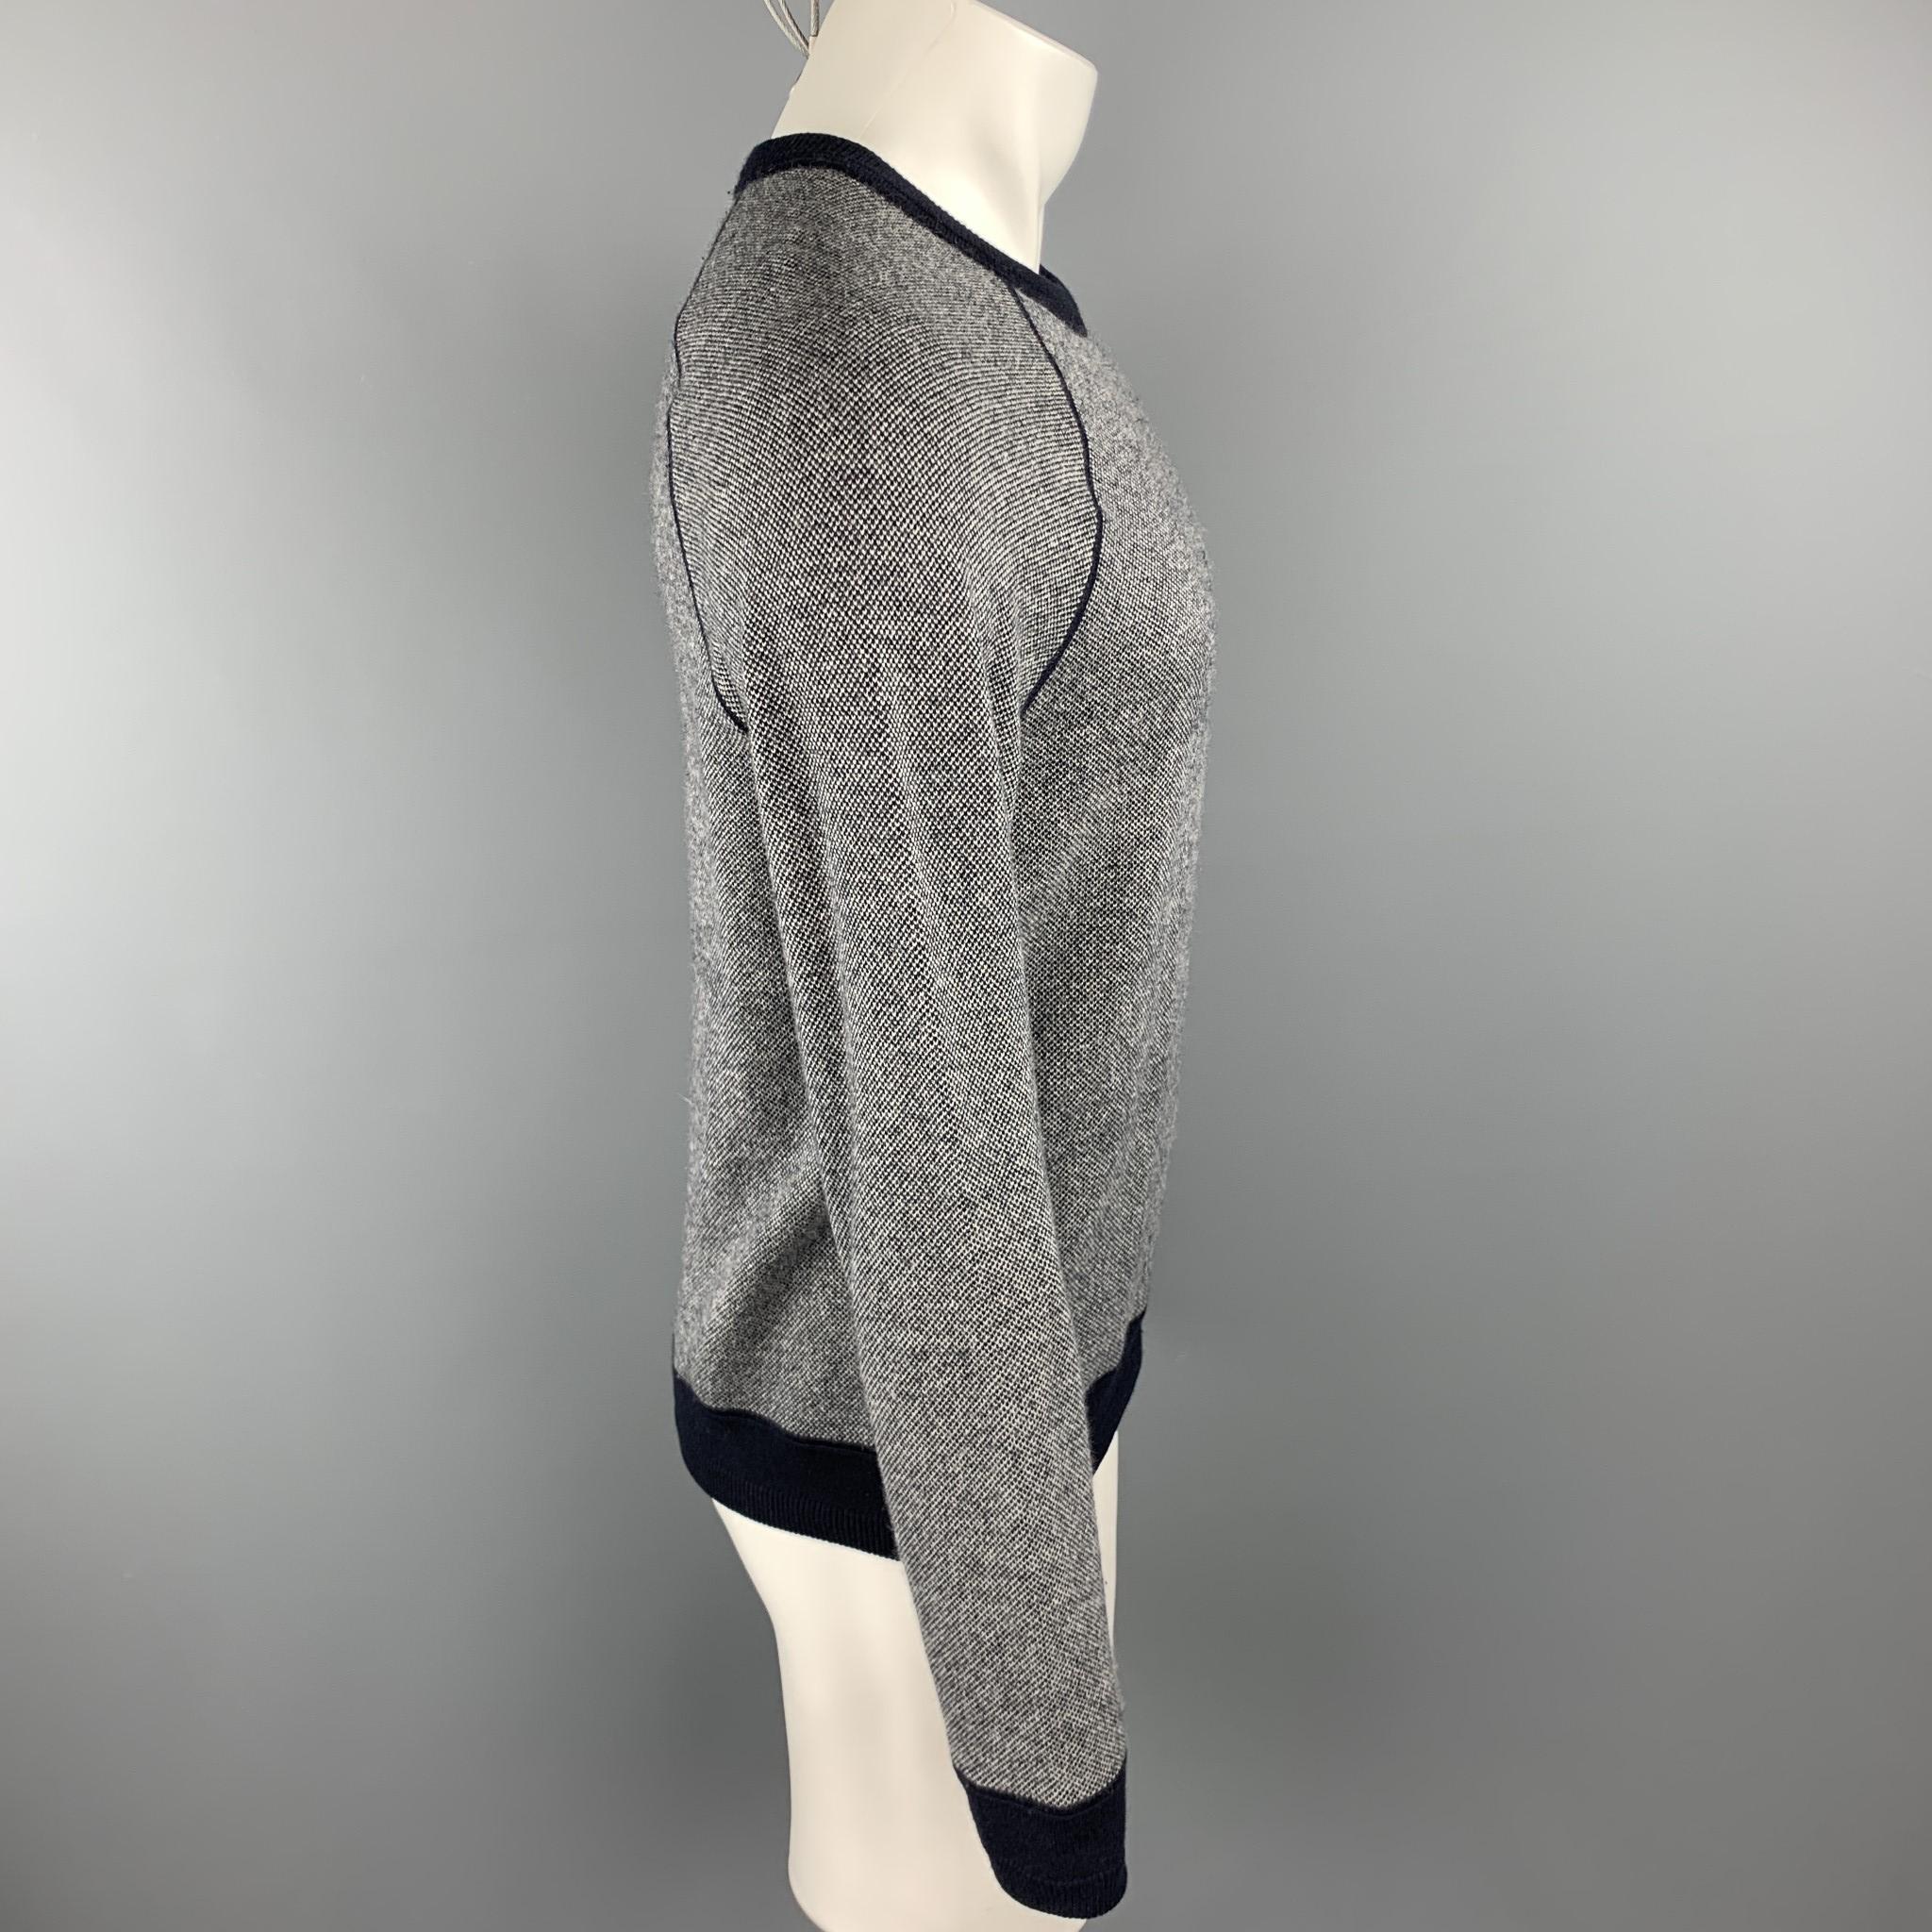 VINCE pullover comes in a gray heather wool / cashmere with a navy trim featuring a raglan style and a crew-neck.

Excellent Pre-Owned Condition.
Marked: S/P

Measurements:

Shoulder: 16.5 in. 
Chest: 40 in. 
Sleeve: 27 in. 
Length: 25 in. 